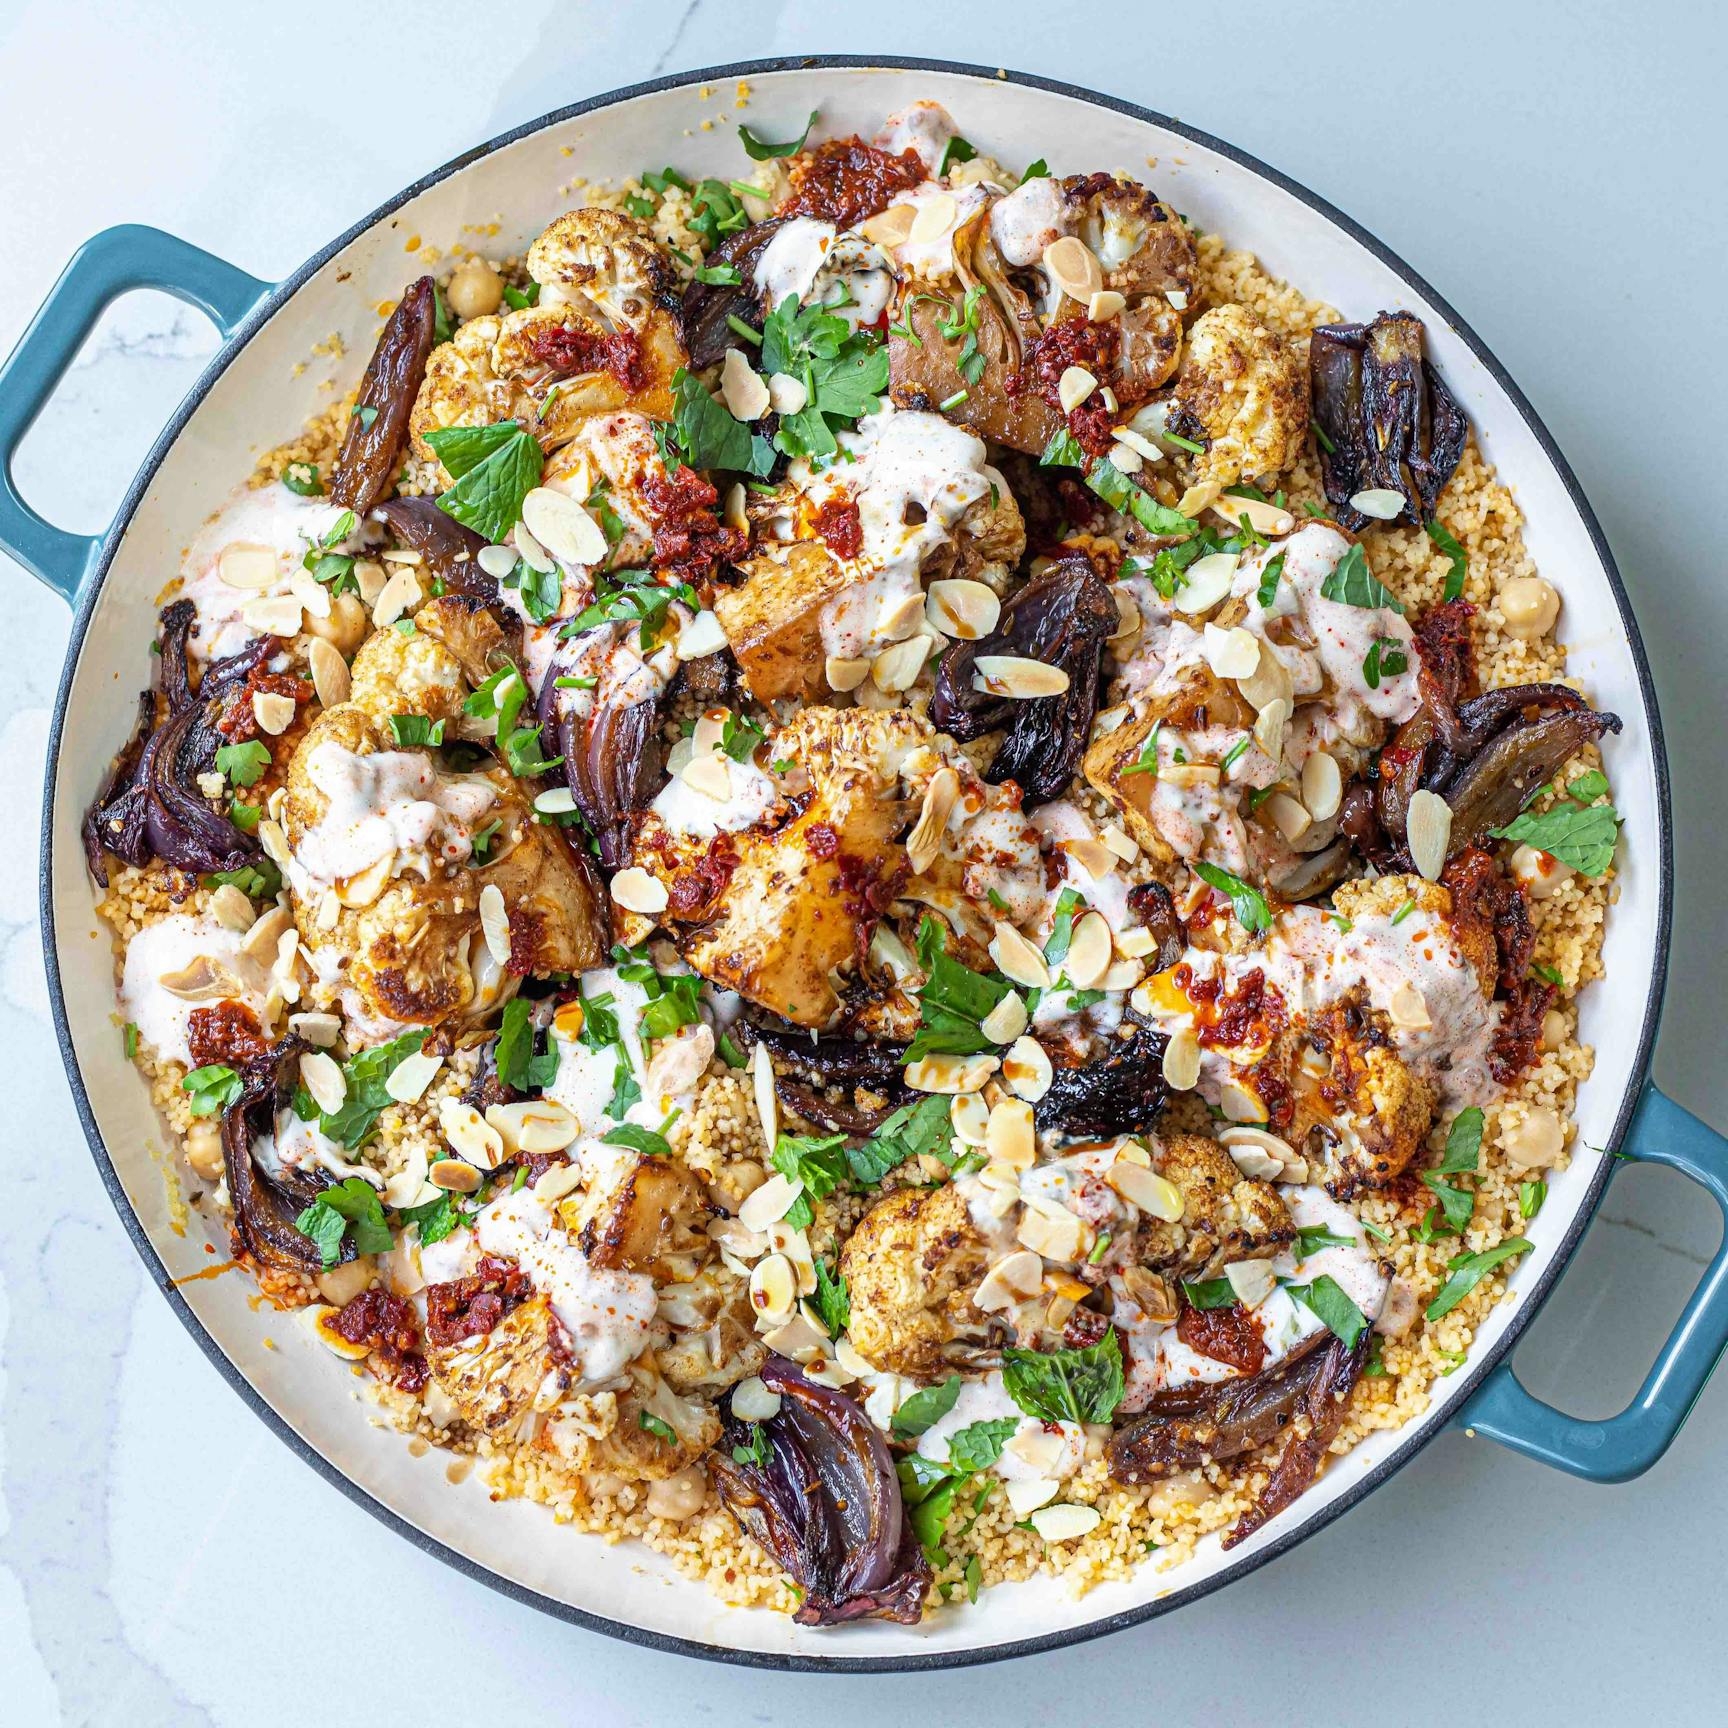 Moroccan Spiced Cauliflower Couscous With Harissa Spiked Yoghurt